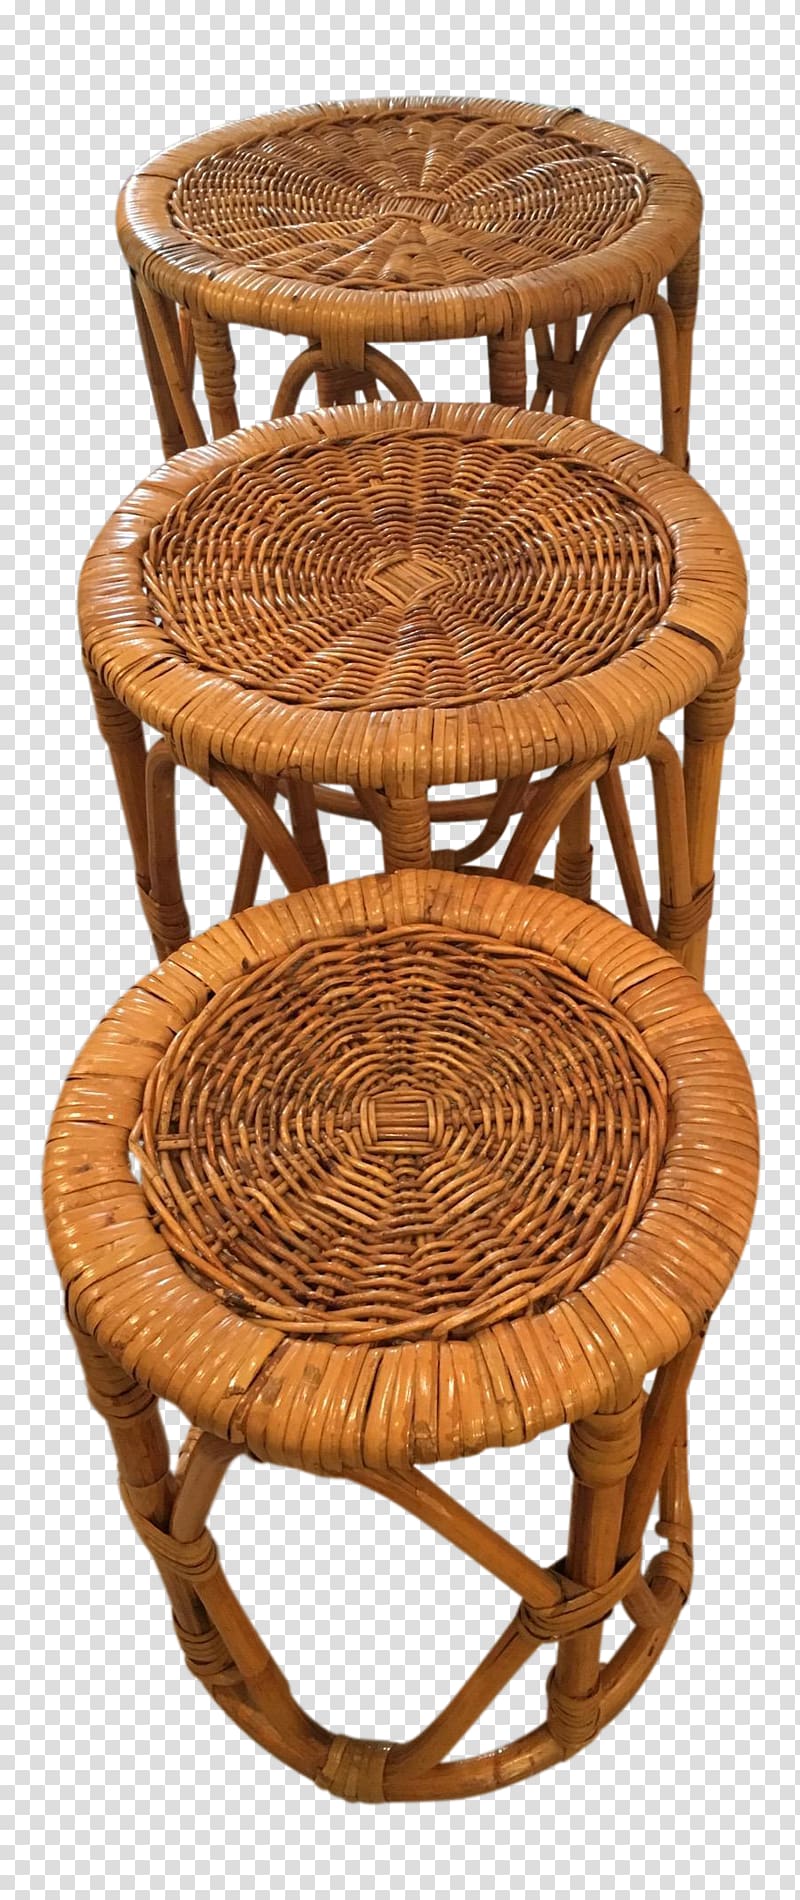 Table Wicker Chair Rattan Caning, noble wicker chair transparent background PNG clipart